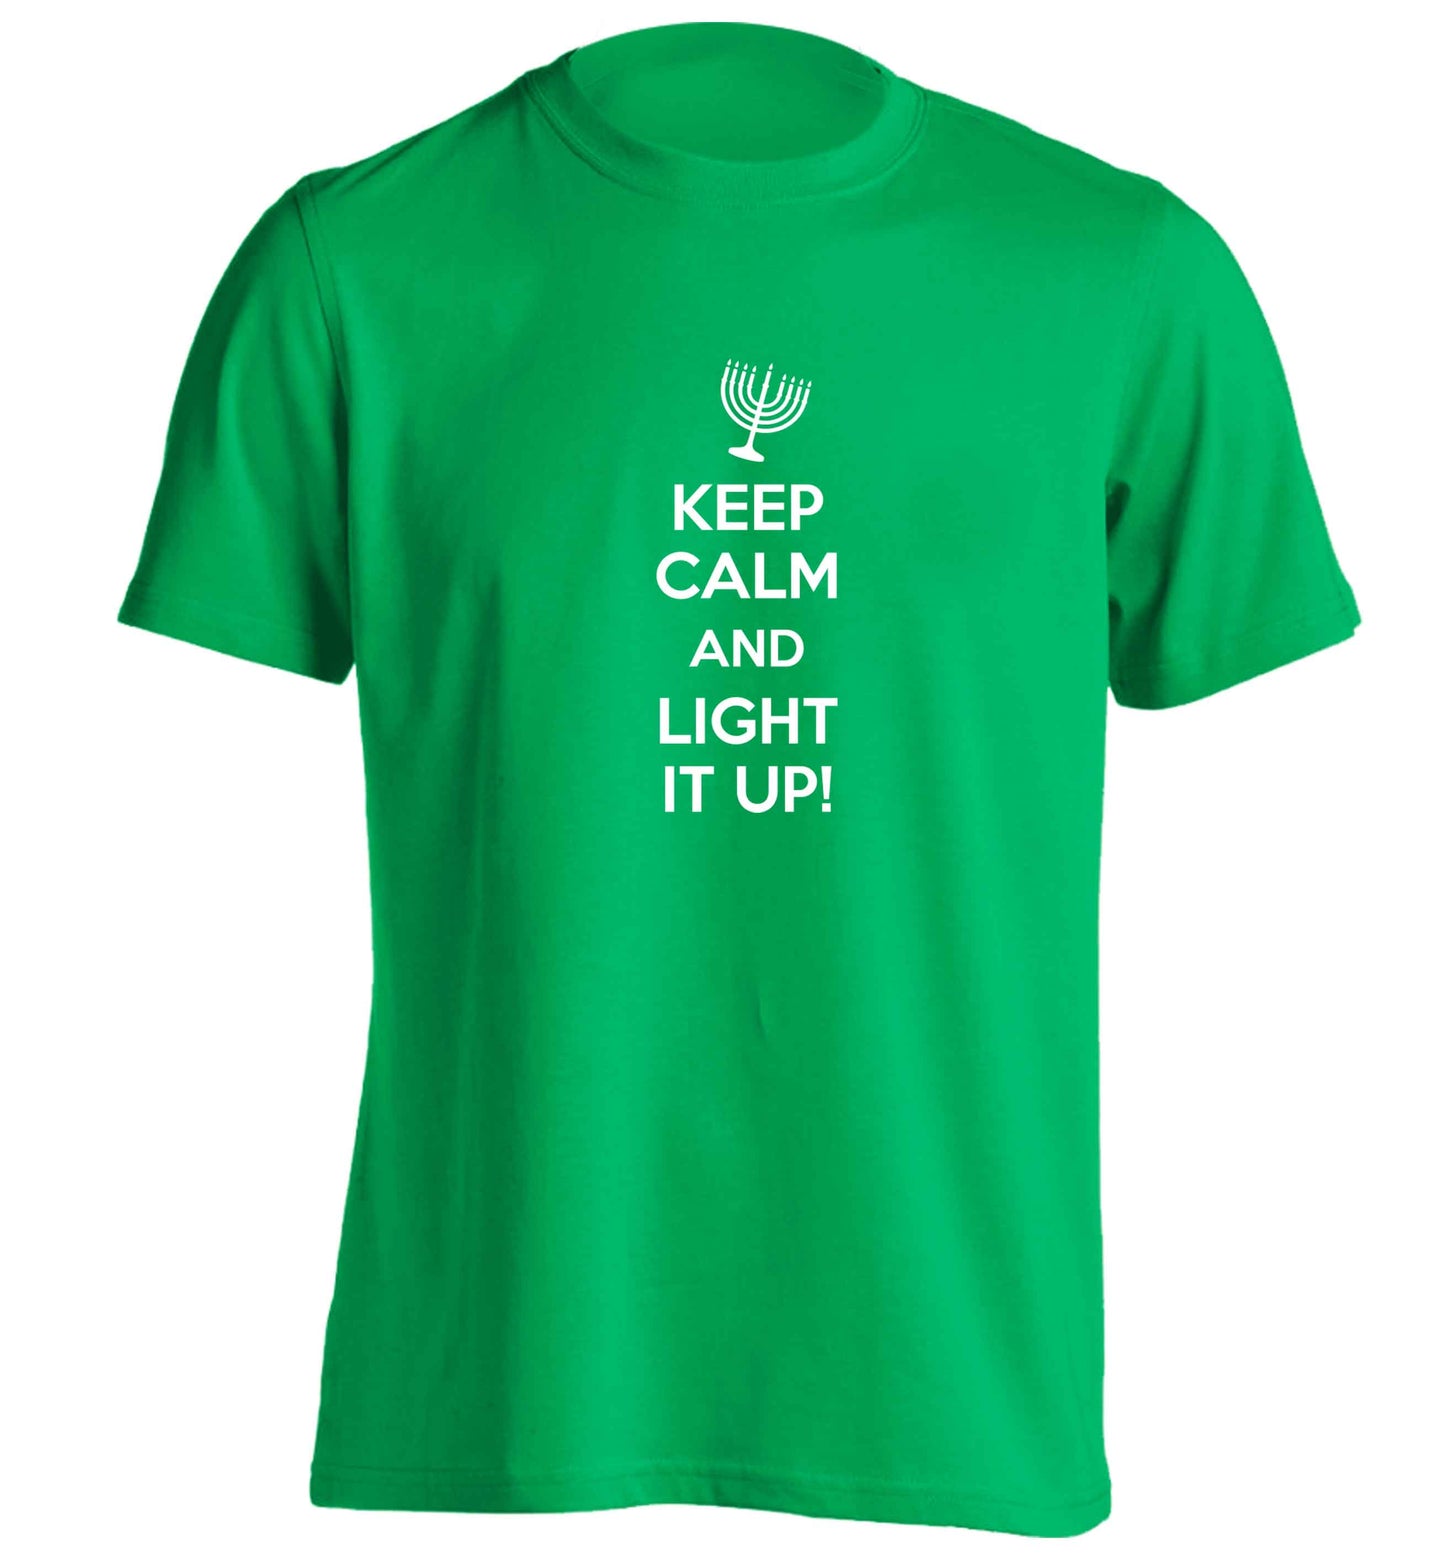 Keep calm and light it up adults unisex green Tshirt 2XL